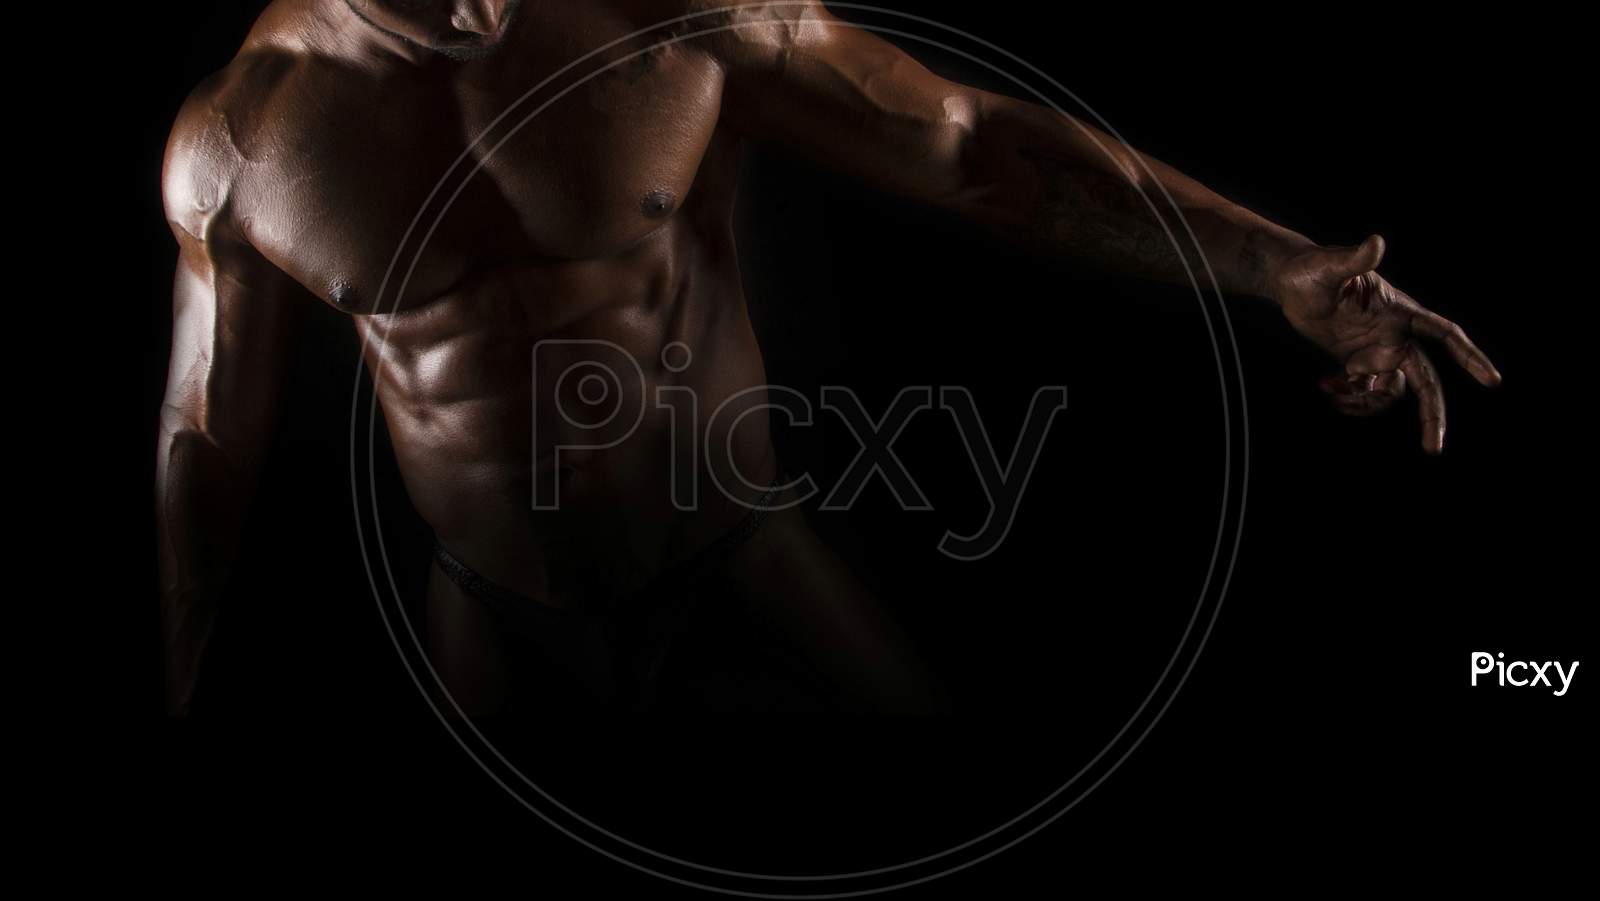 Silhouette of young athlete bodybuilder man on black